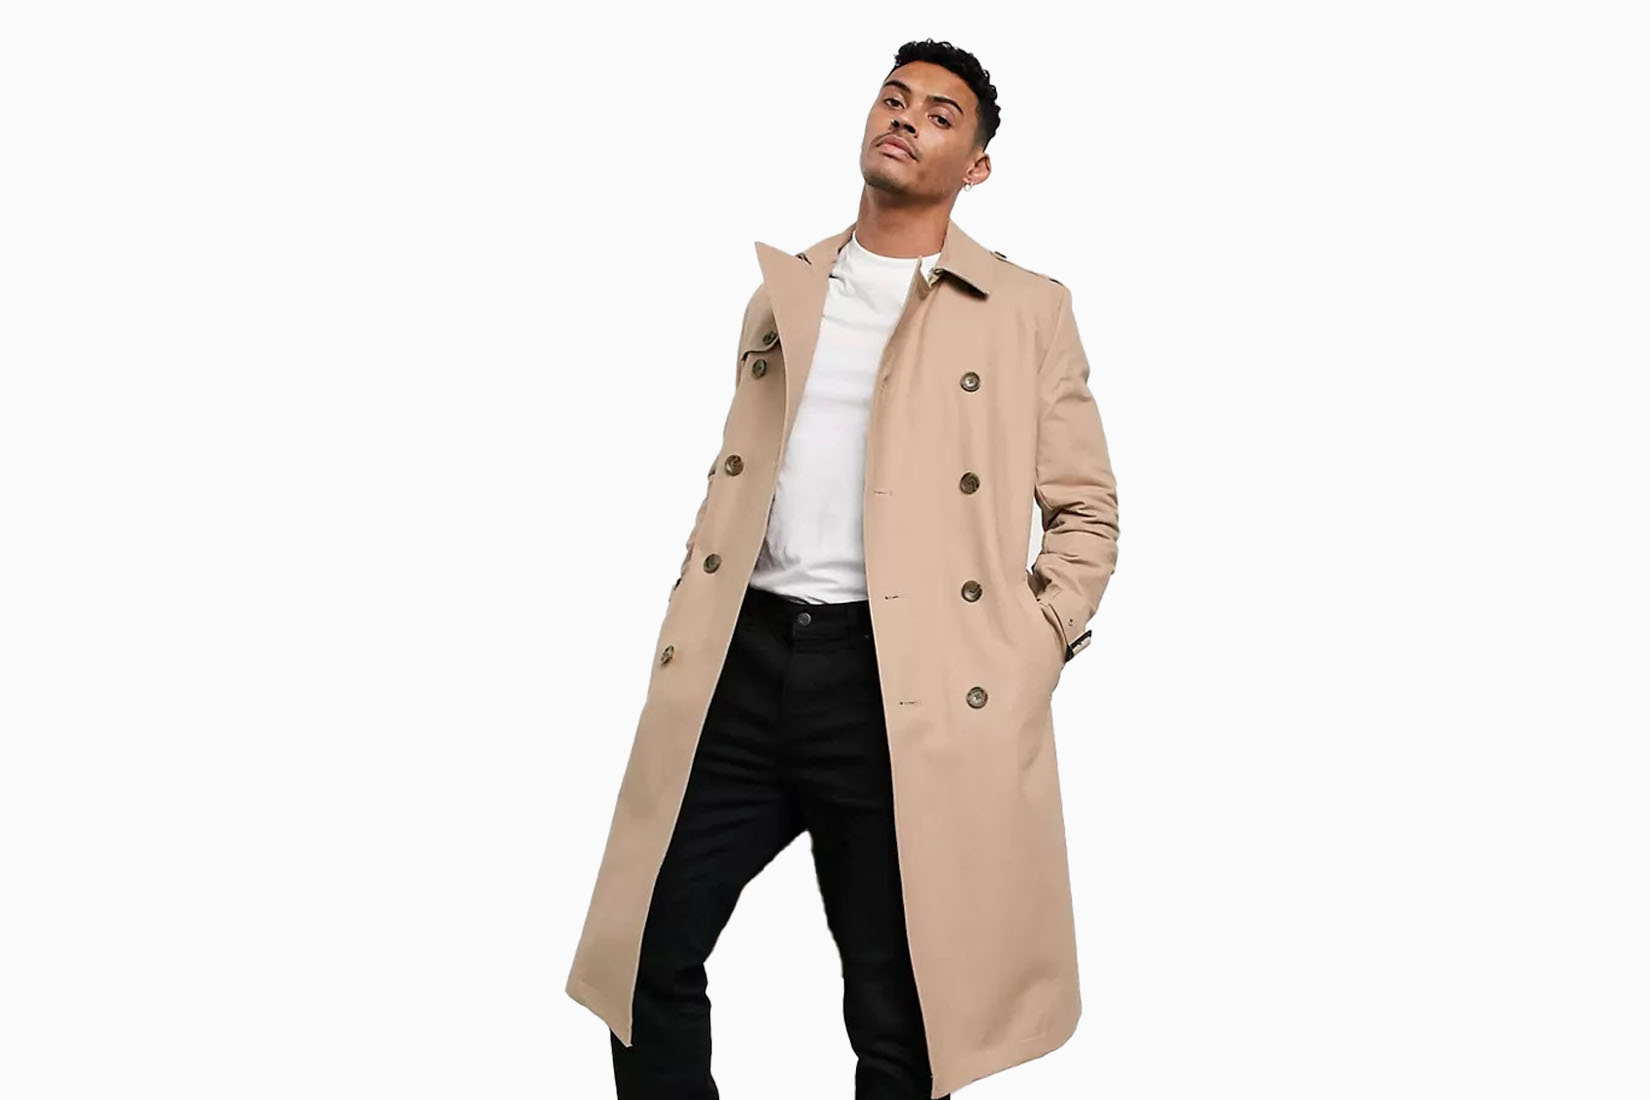 Hooded Trench Coat Mens Cheapest Sales, Save 63% | jlcatj.gob.mx